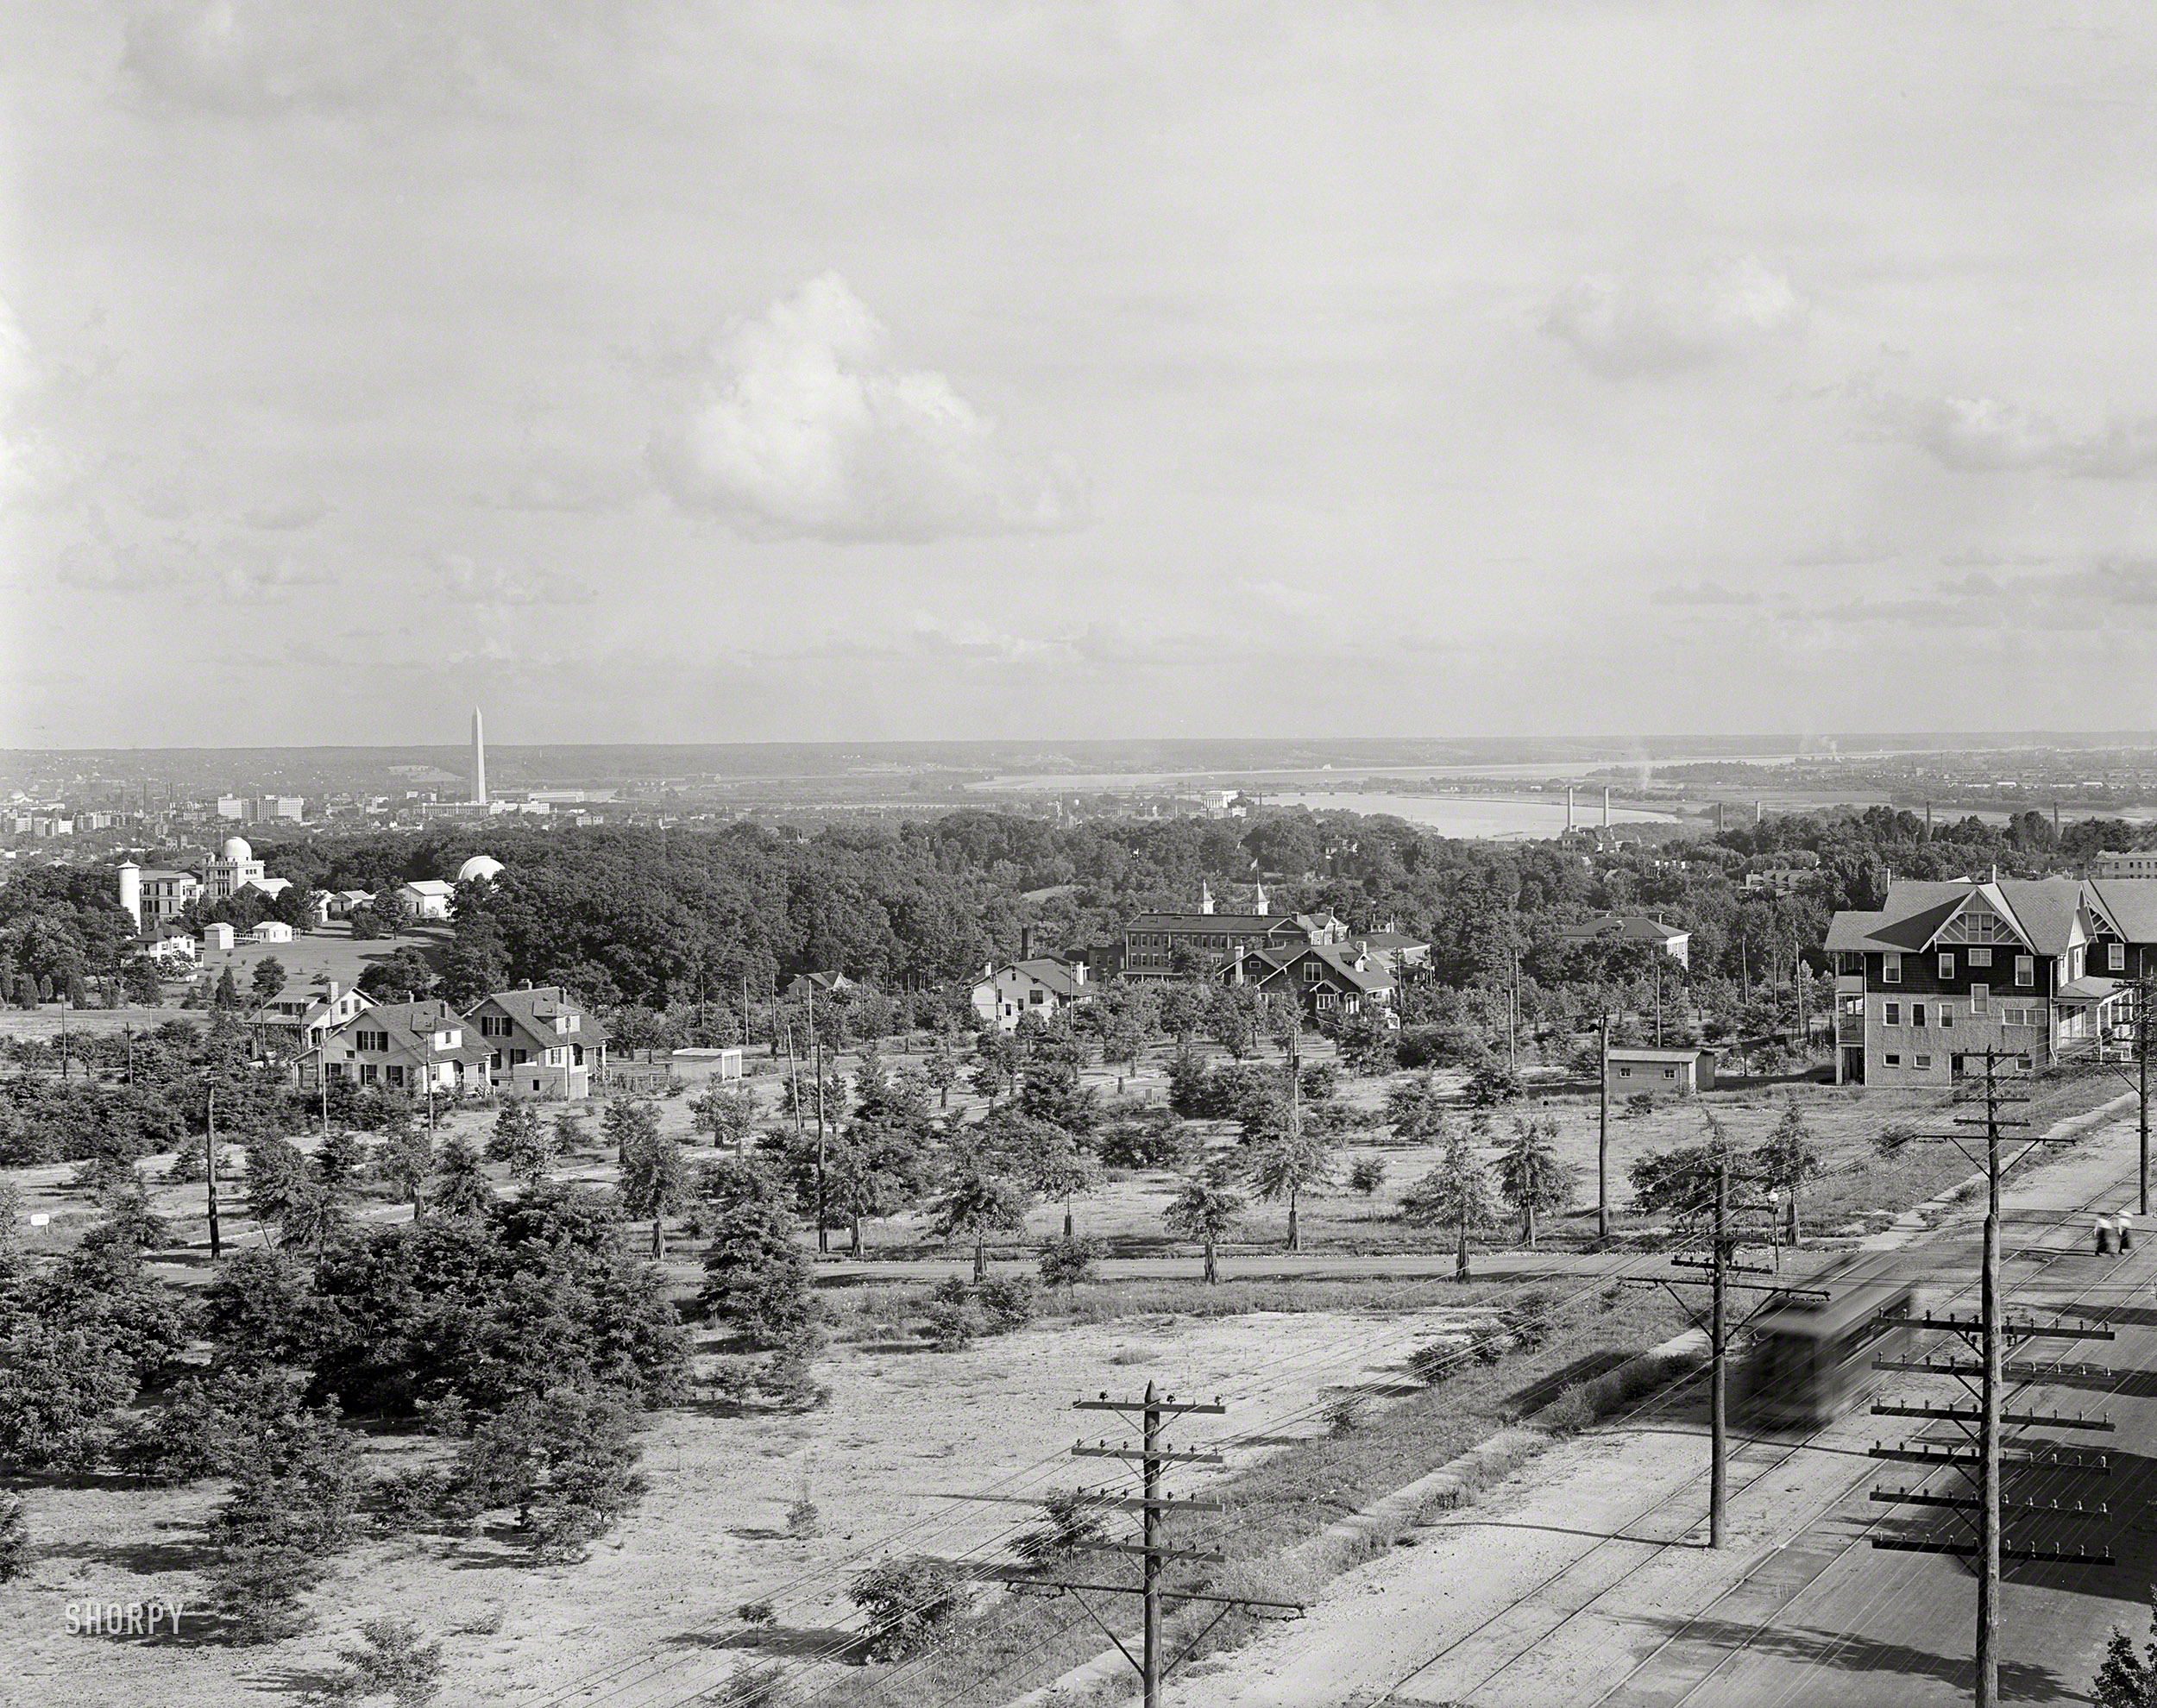 Washington, D.C., circa 1923. "View of Naval Observatory and Washington from Massachusetts Avenue hill." Harris & Ewing glass negative. View full size.